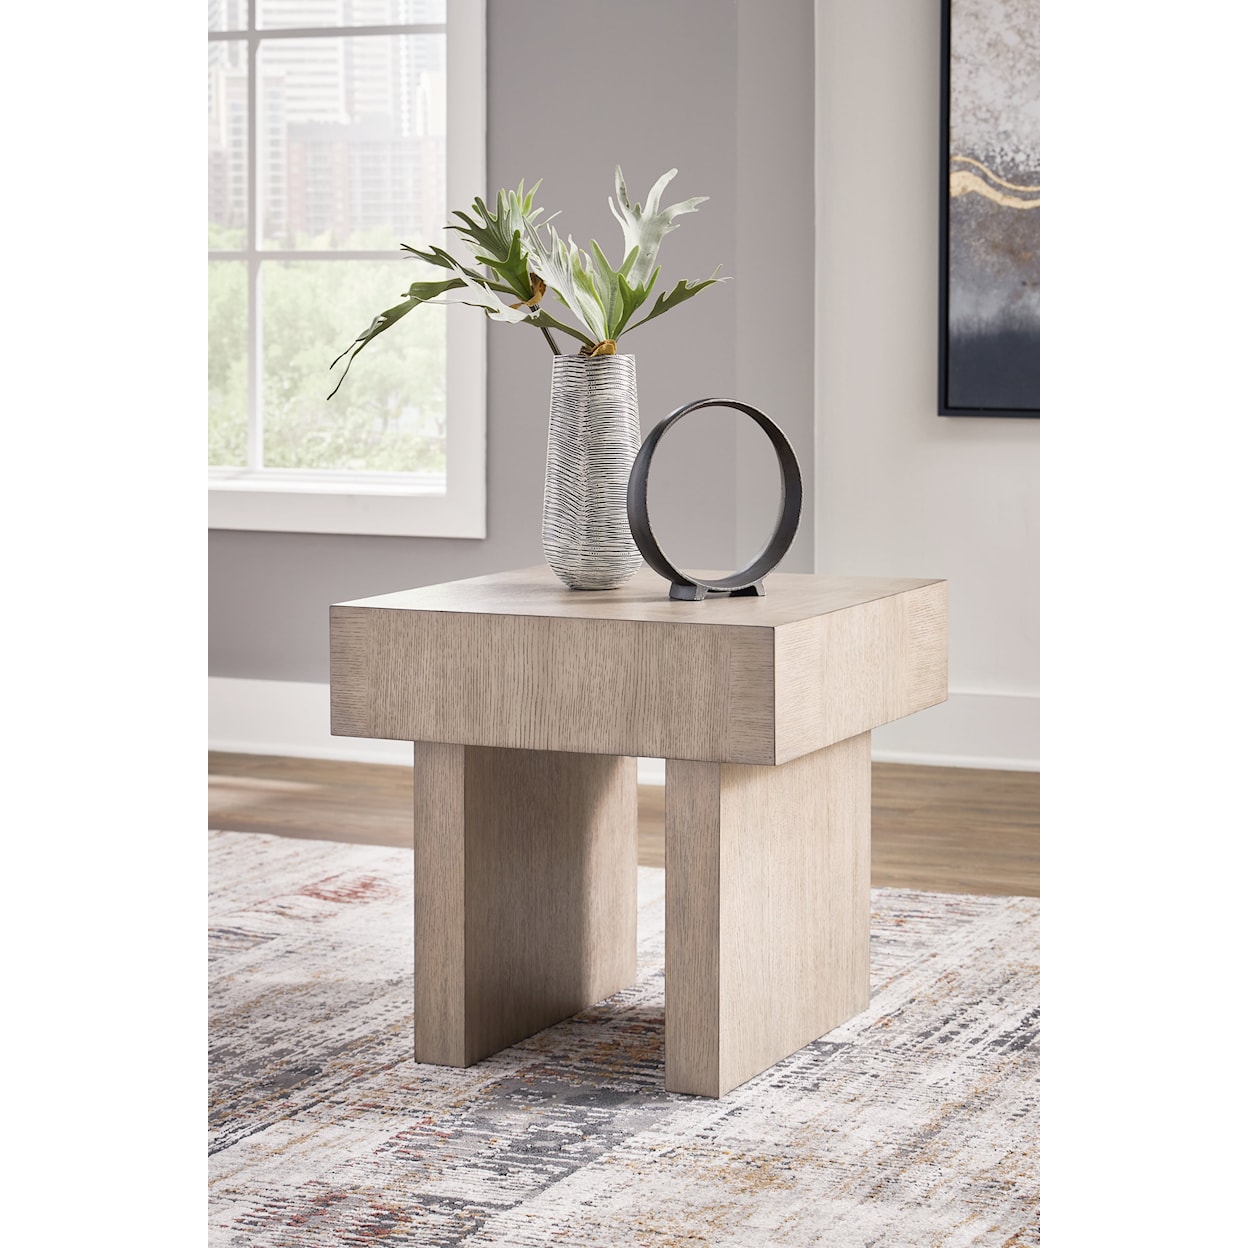 Benchcraft Jorlaina Coffee Table and 2 End Tables